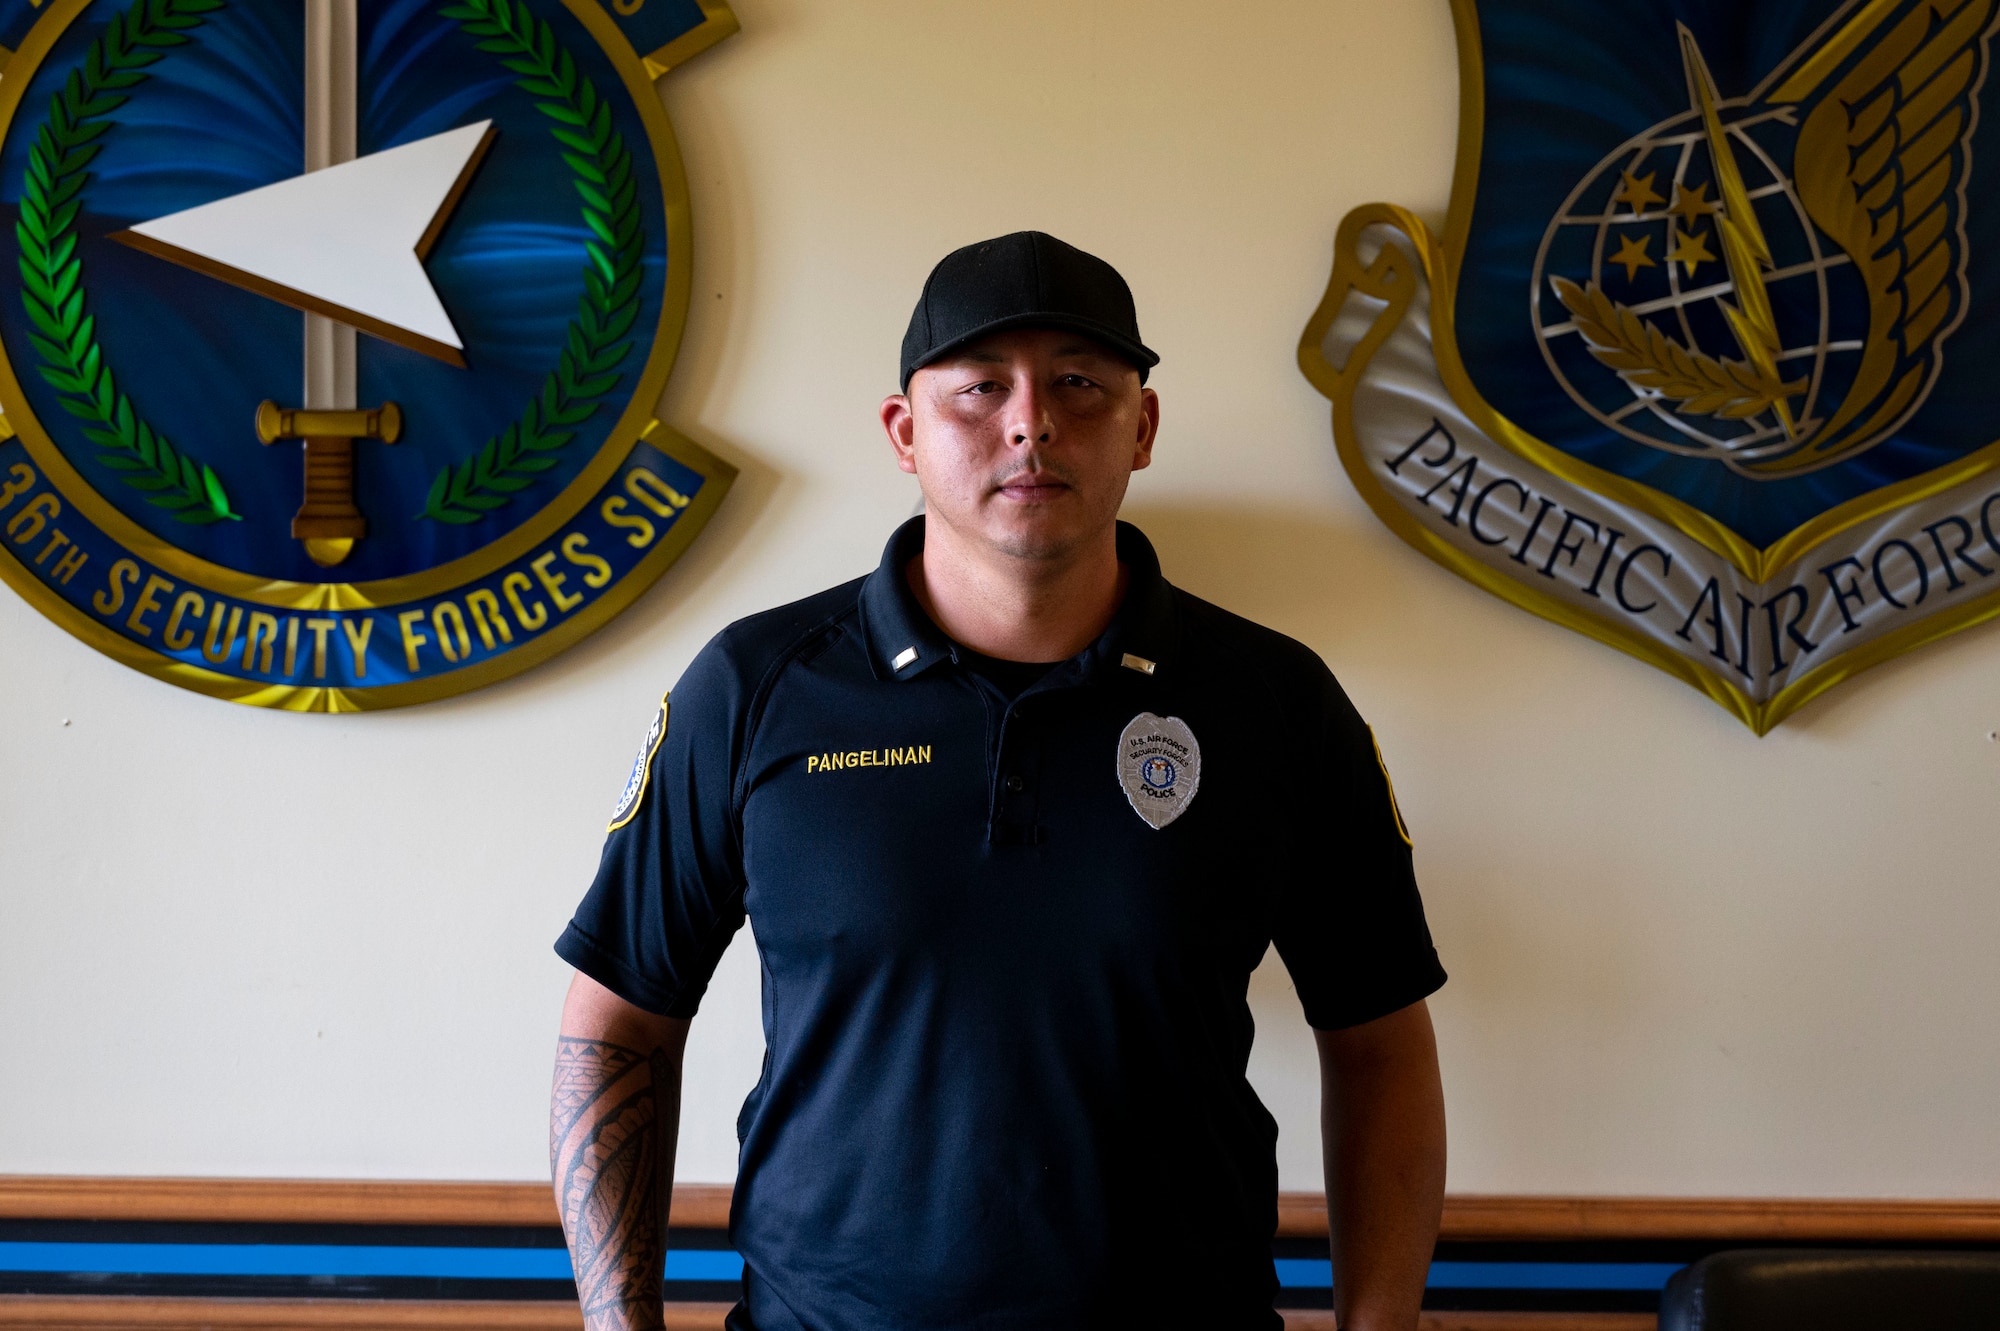 Dwayne Pangelinan, 36th Security Forces Squadron supervisory police officer, poses for a photo, March 31, 2023, at Andersen Air Force Base, Guam. Pangelinan received a Medal of Valor for his courageous actions during two separate incidents. (U.S. Air Force photo by Airman 1st Class Emily Saxton)